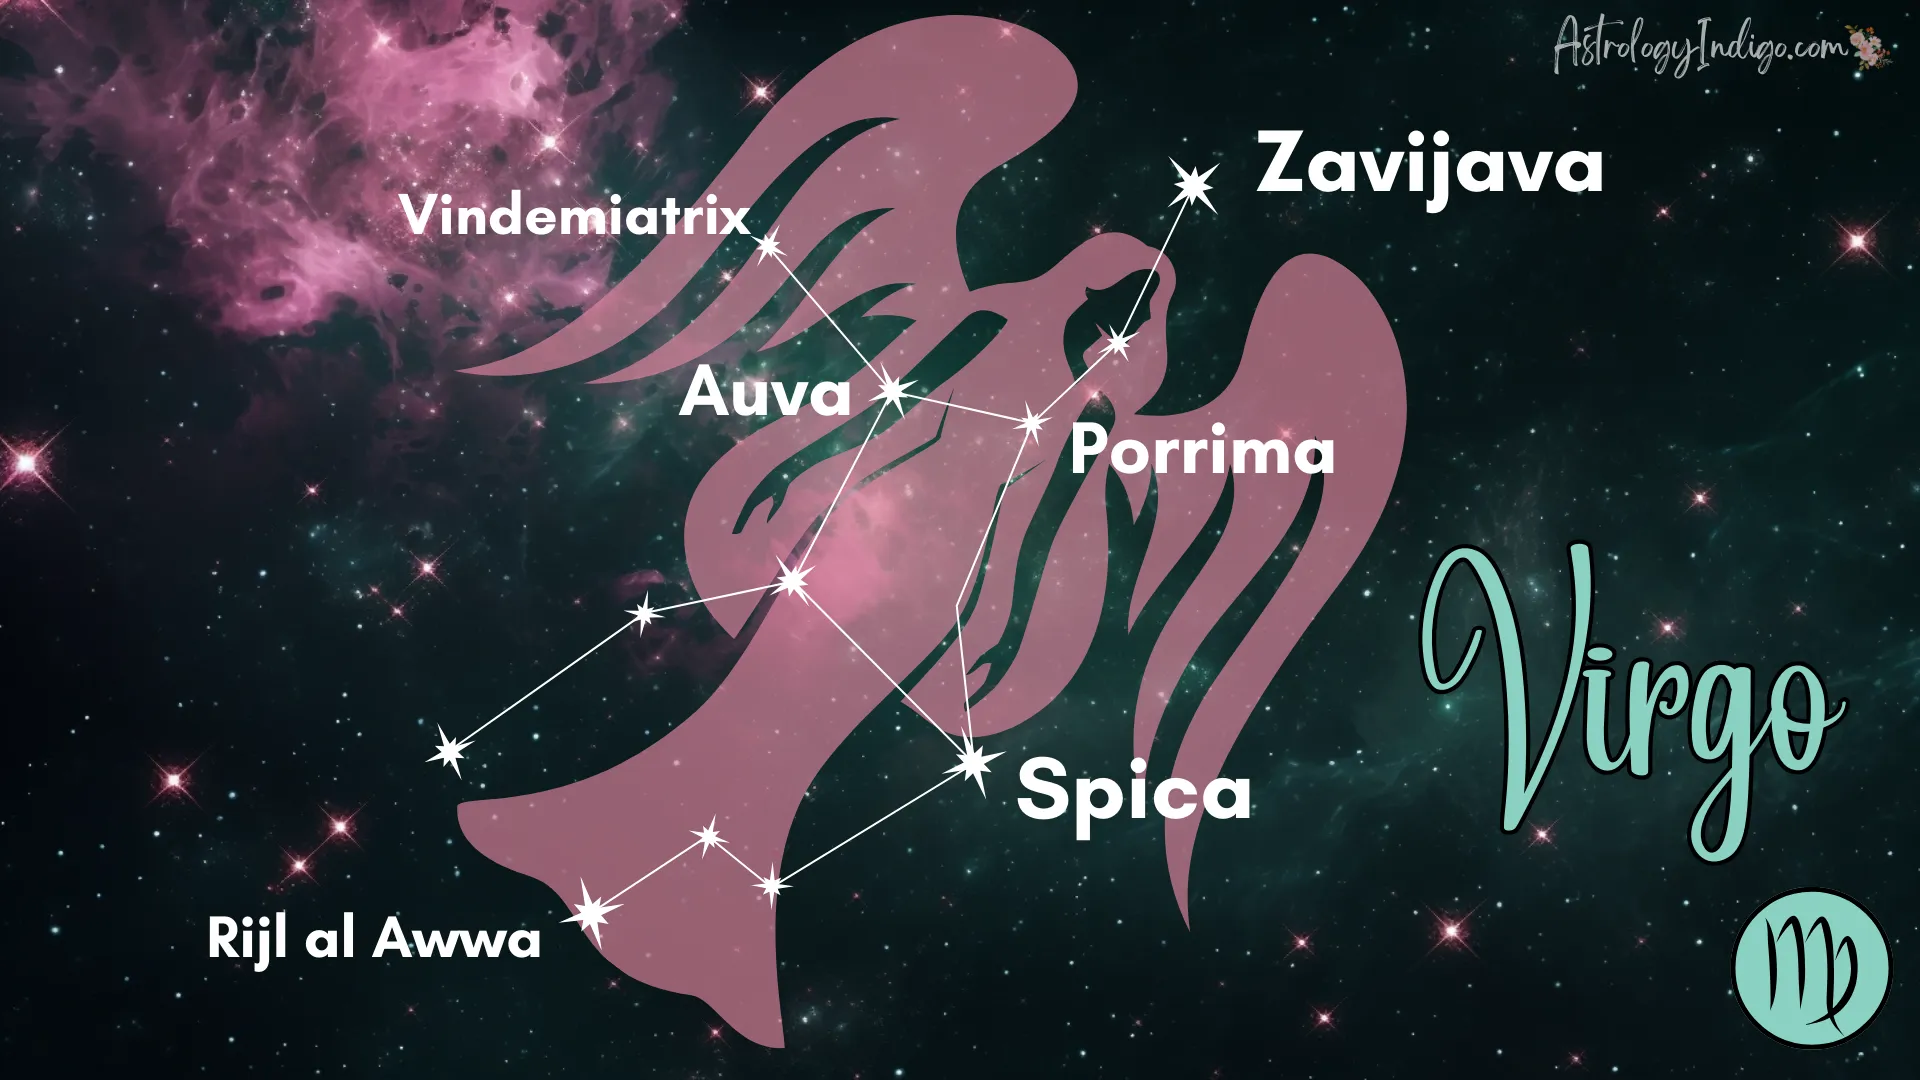 The Virgo constellation with information about the stars and a pink image of an Angel behind it.